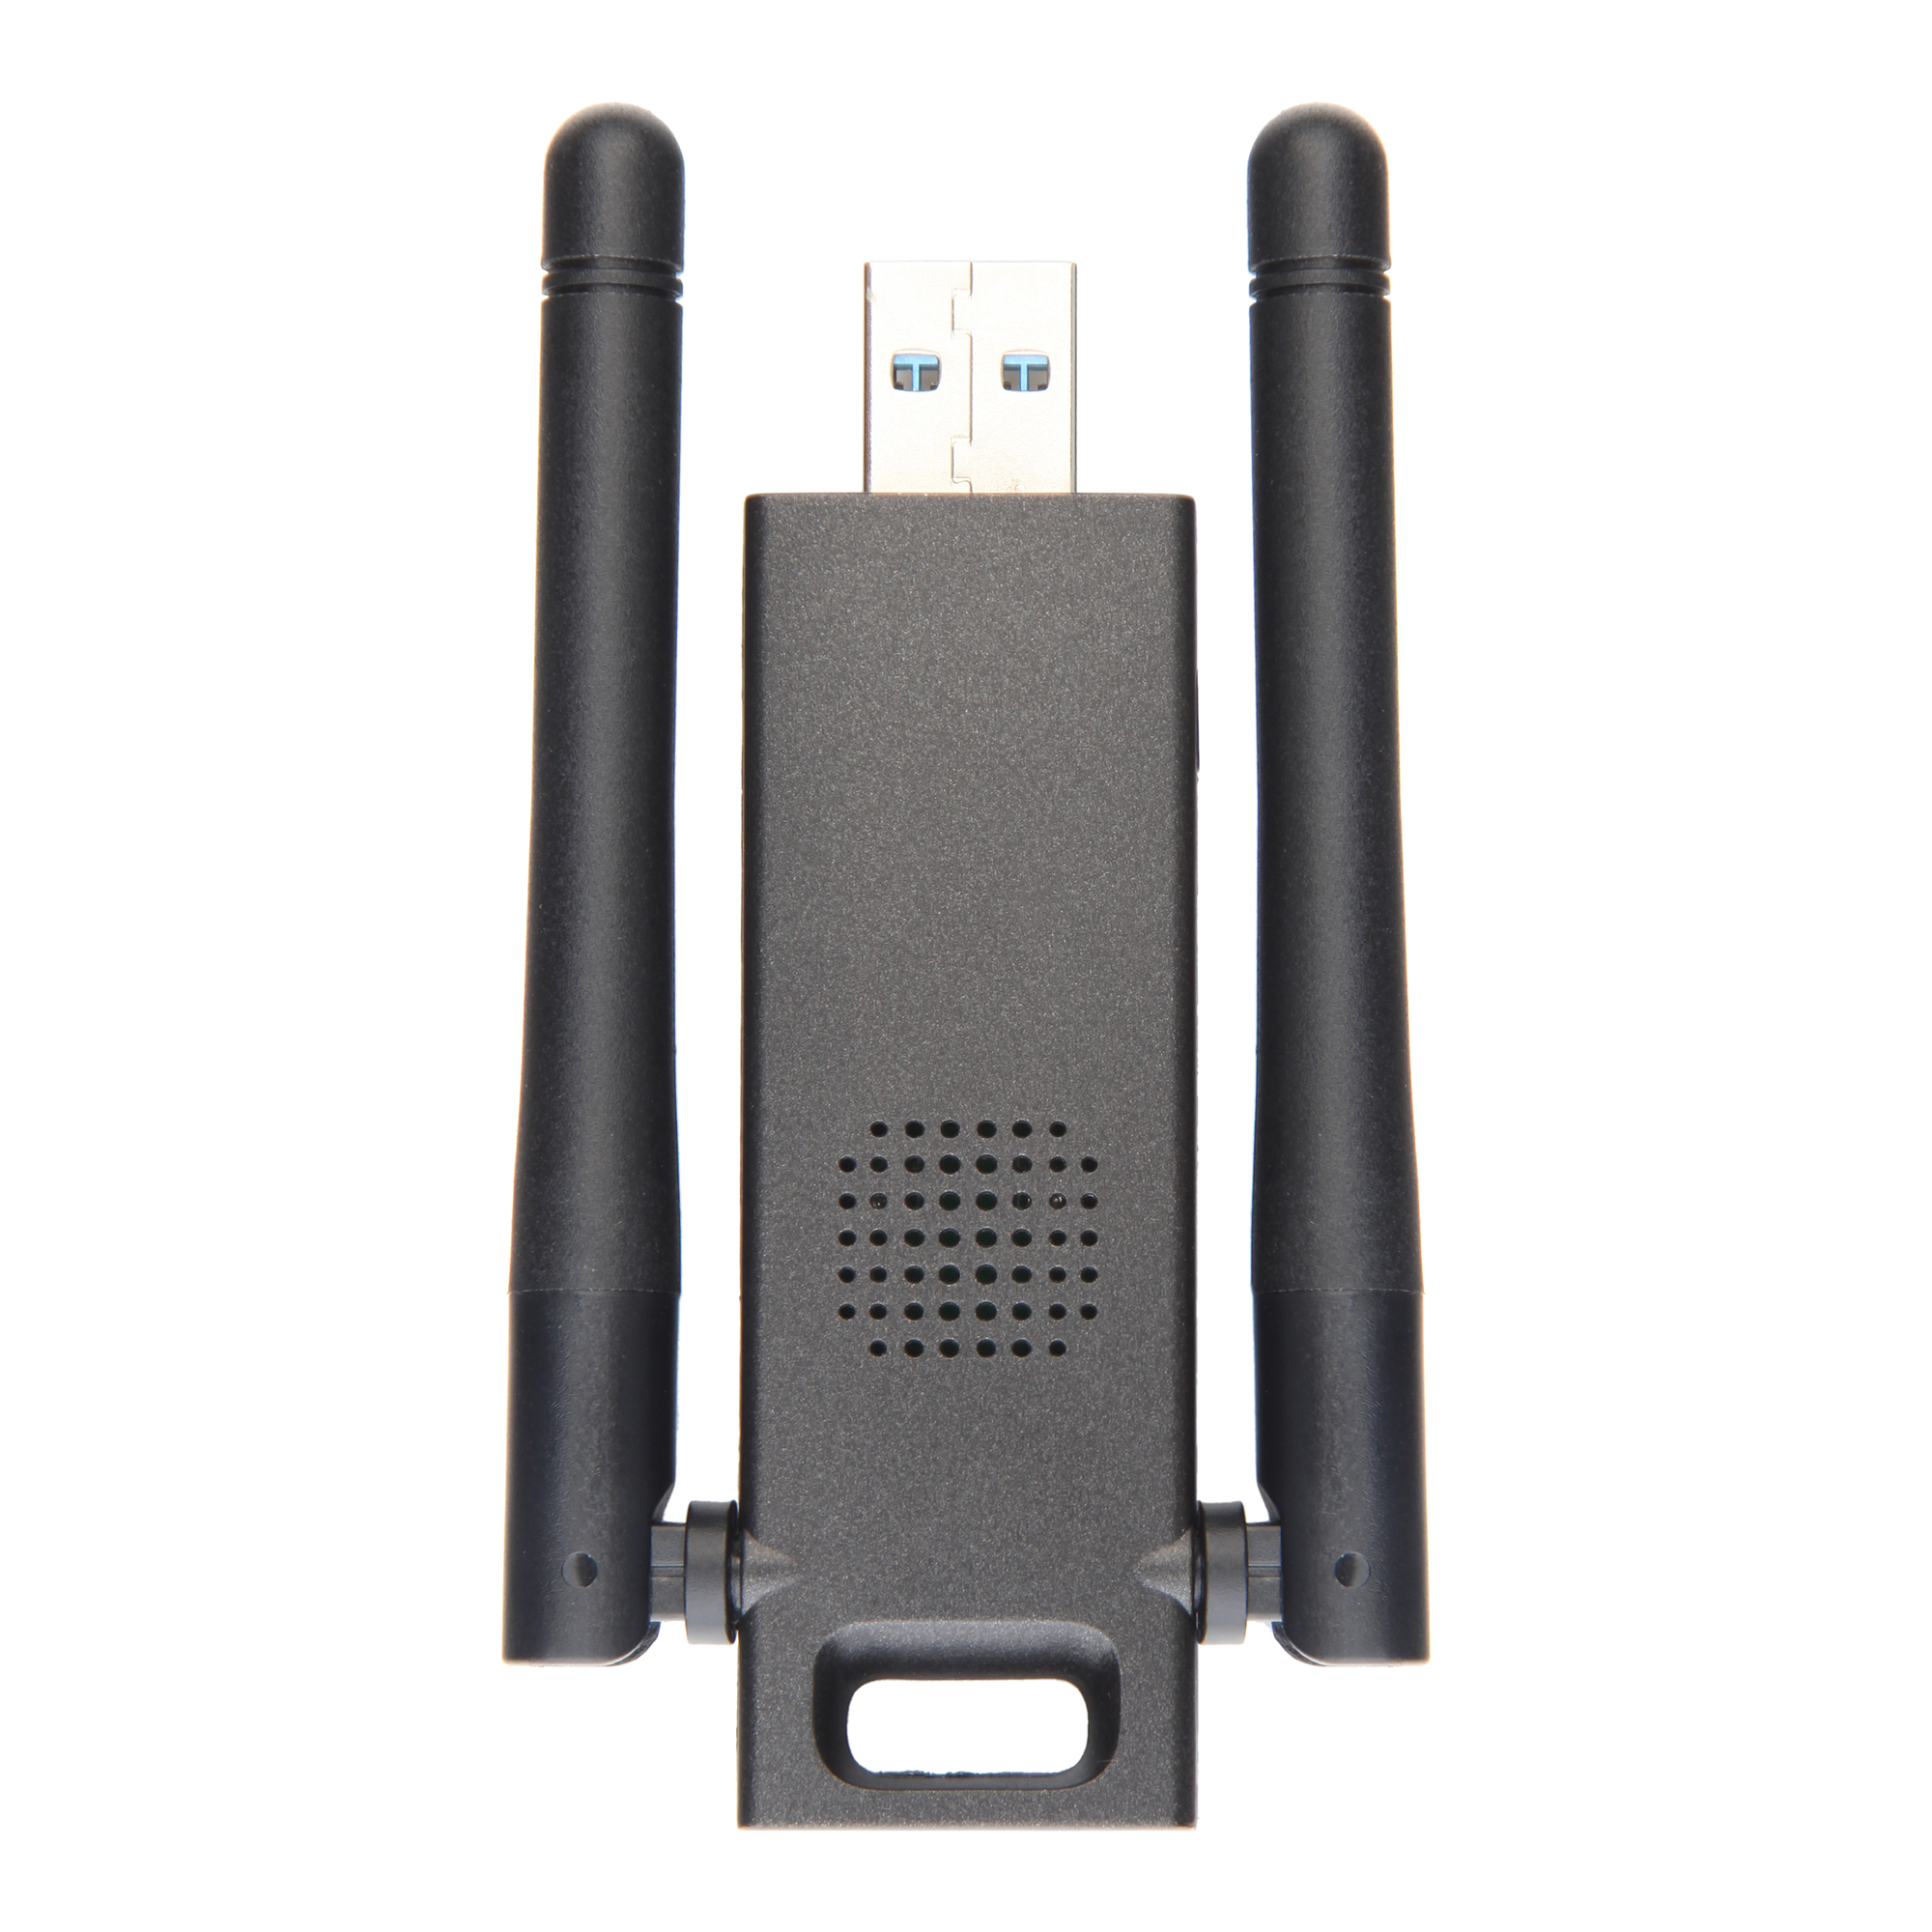 300mbps wireless high power usb adapter driver